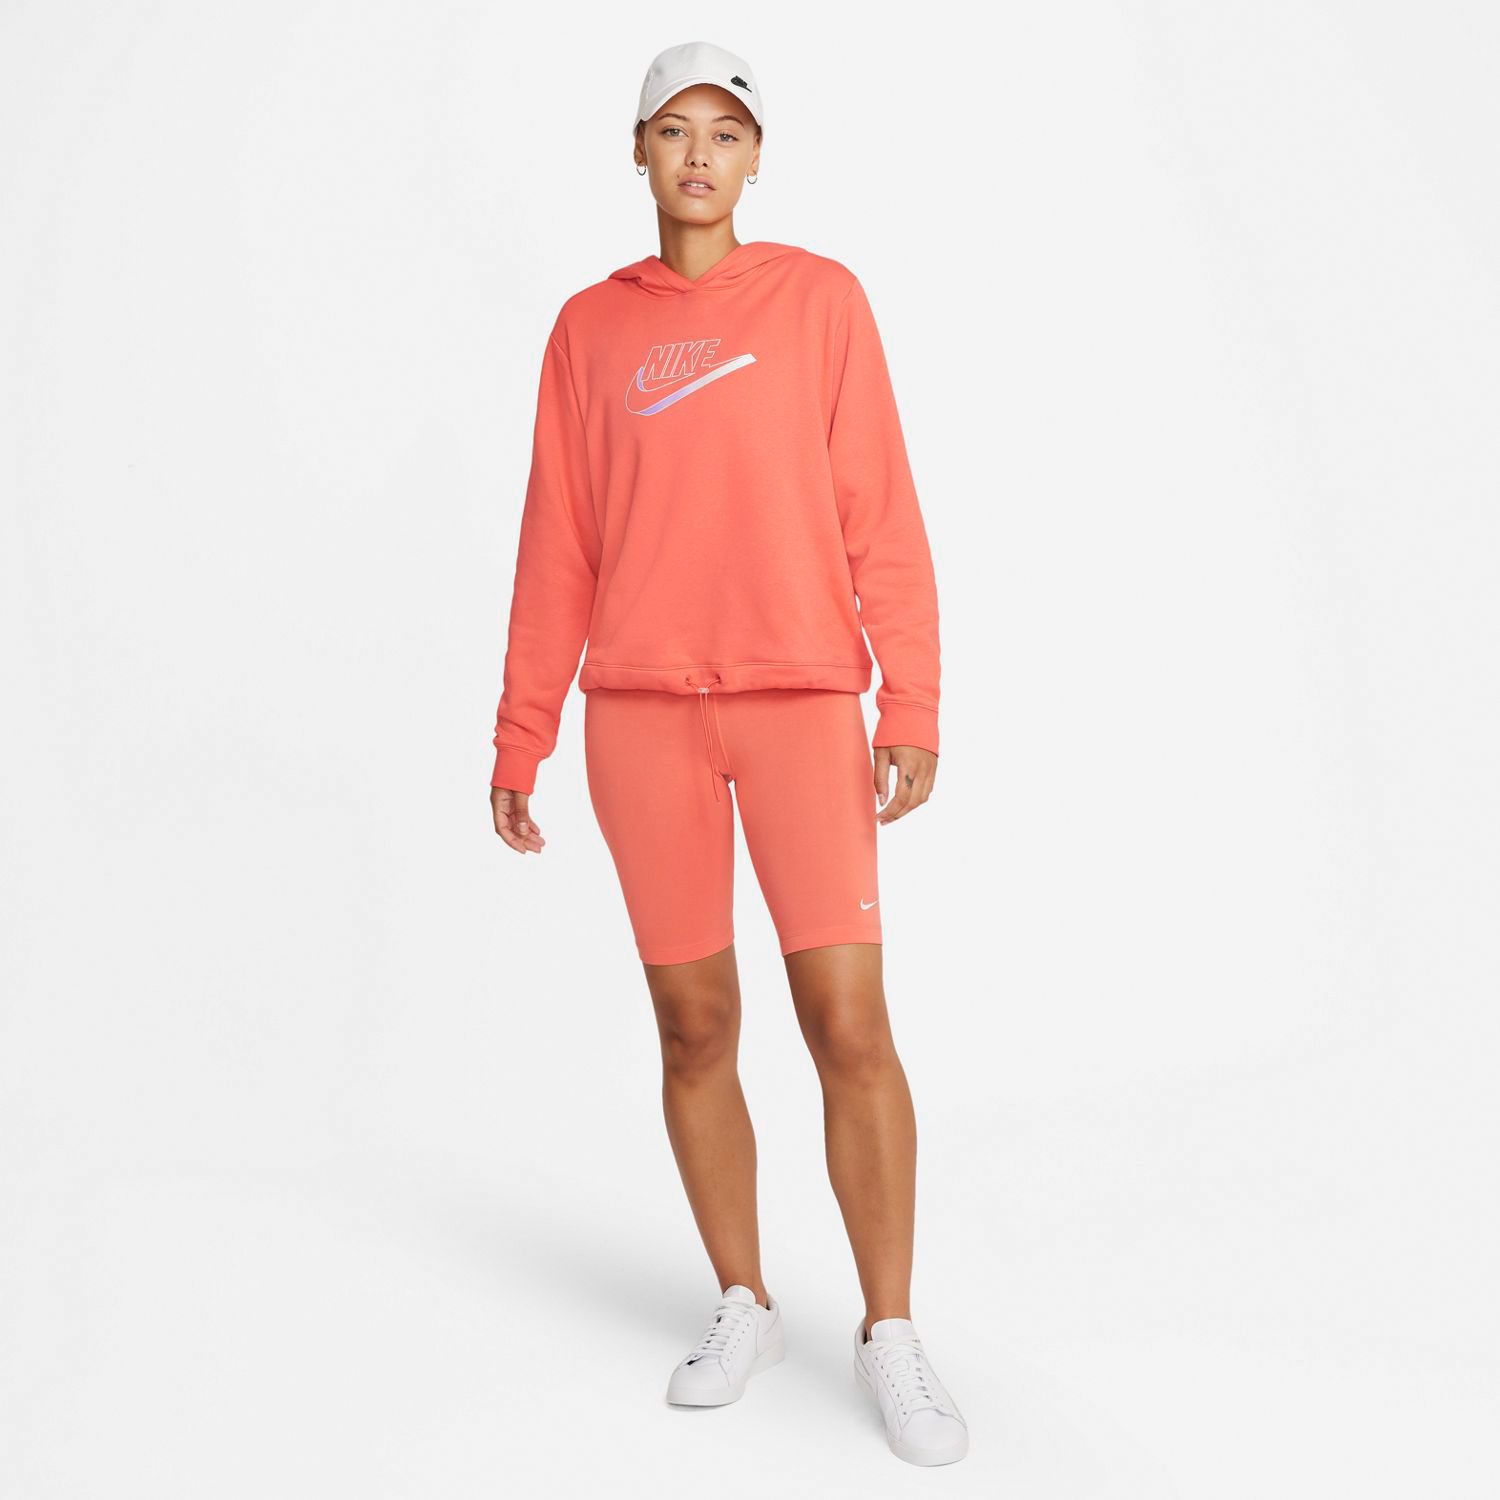 Find FLX activewear at Kohl's.  Active outfits, Hoodies womens, Active wear